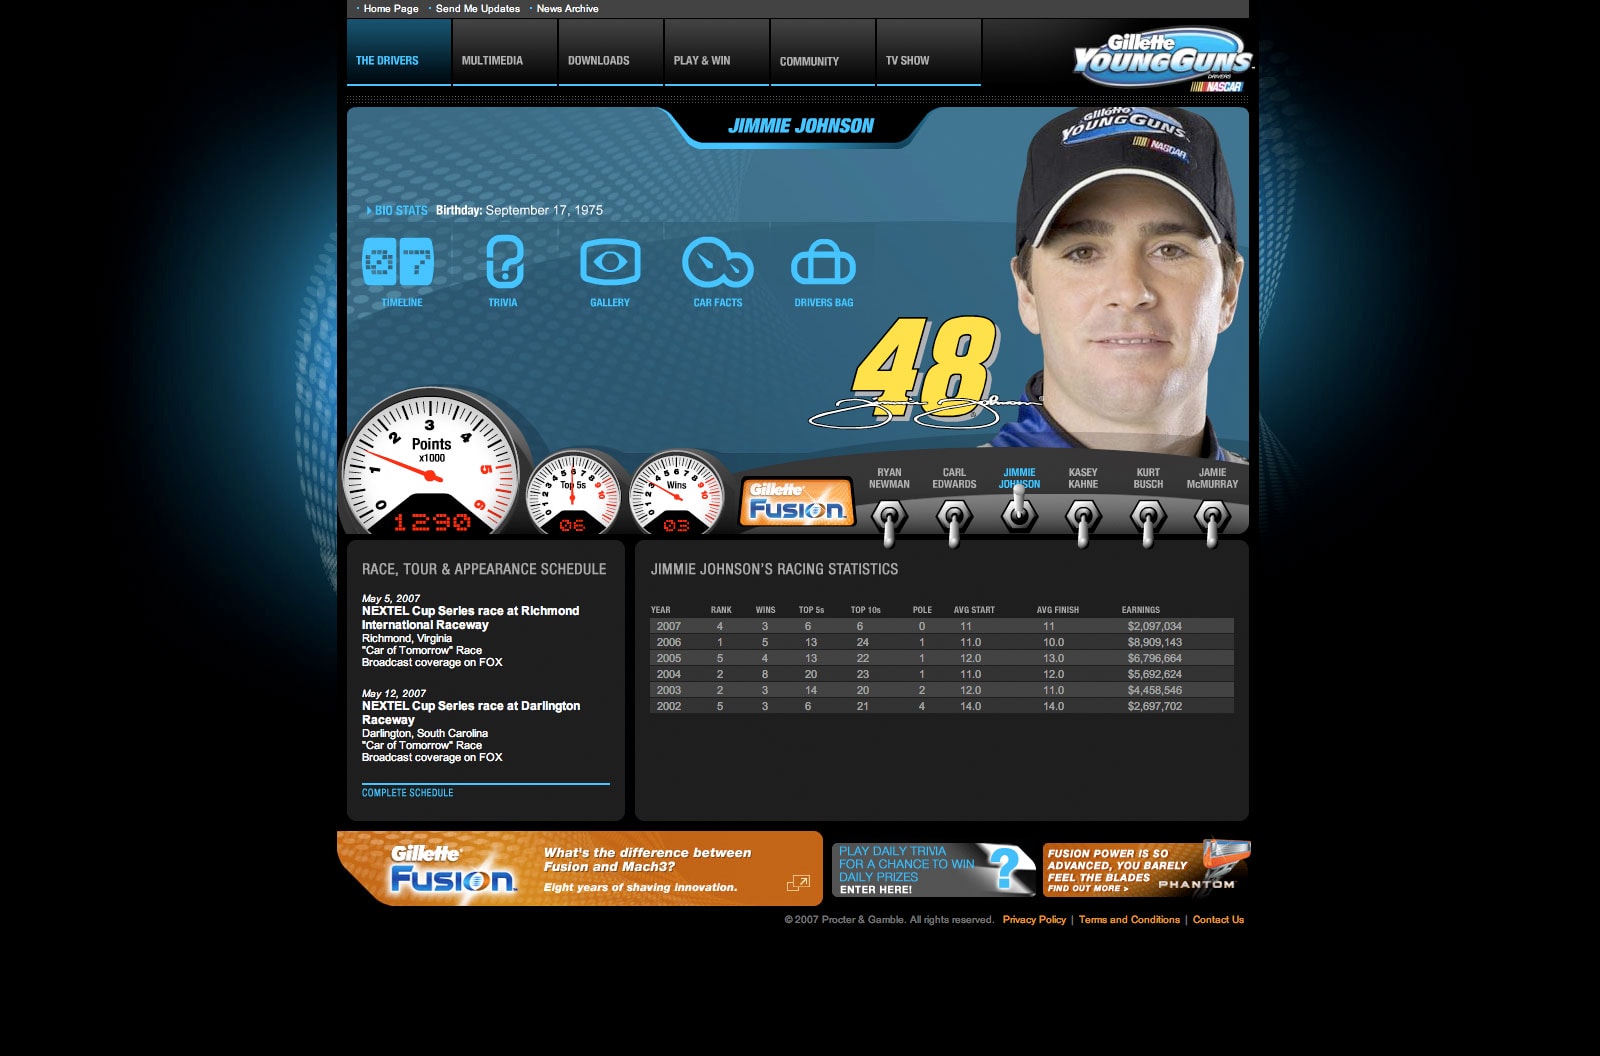 Gillette Young Guns microsite driver detail page